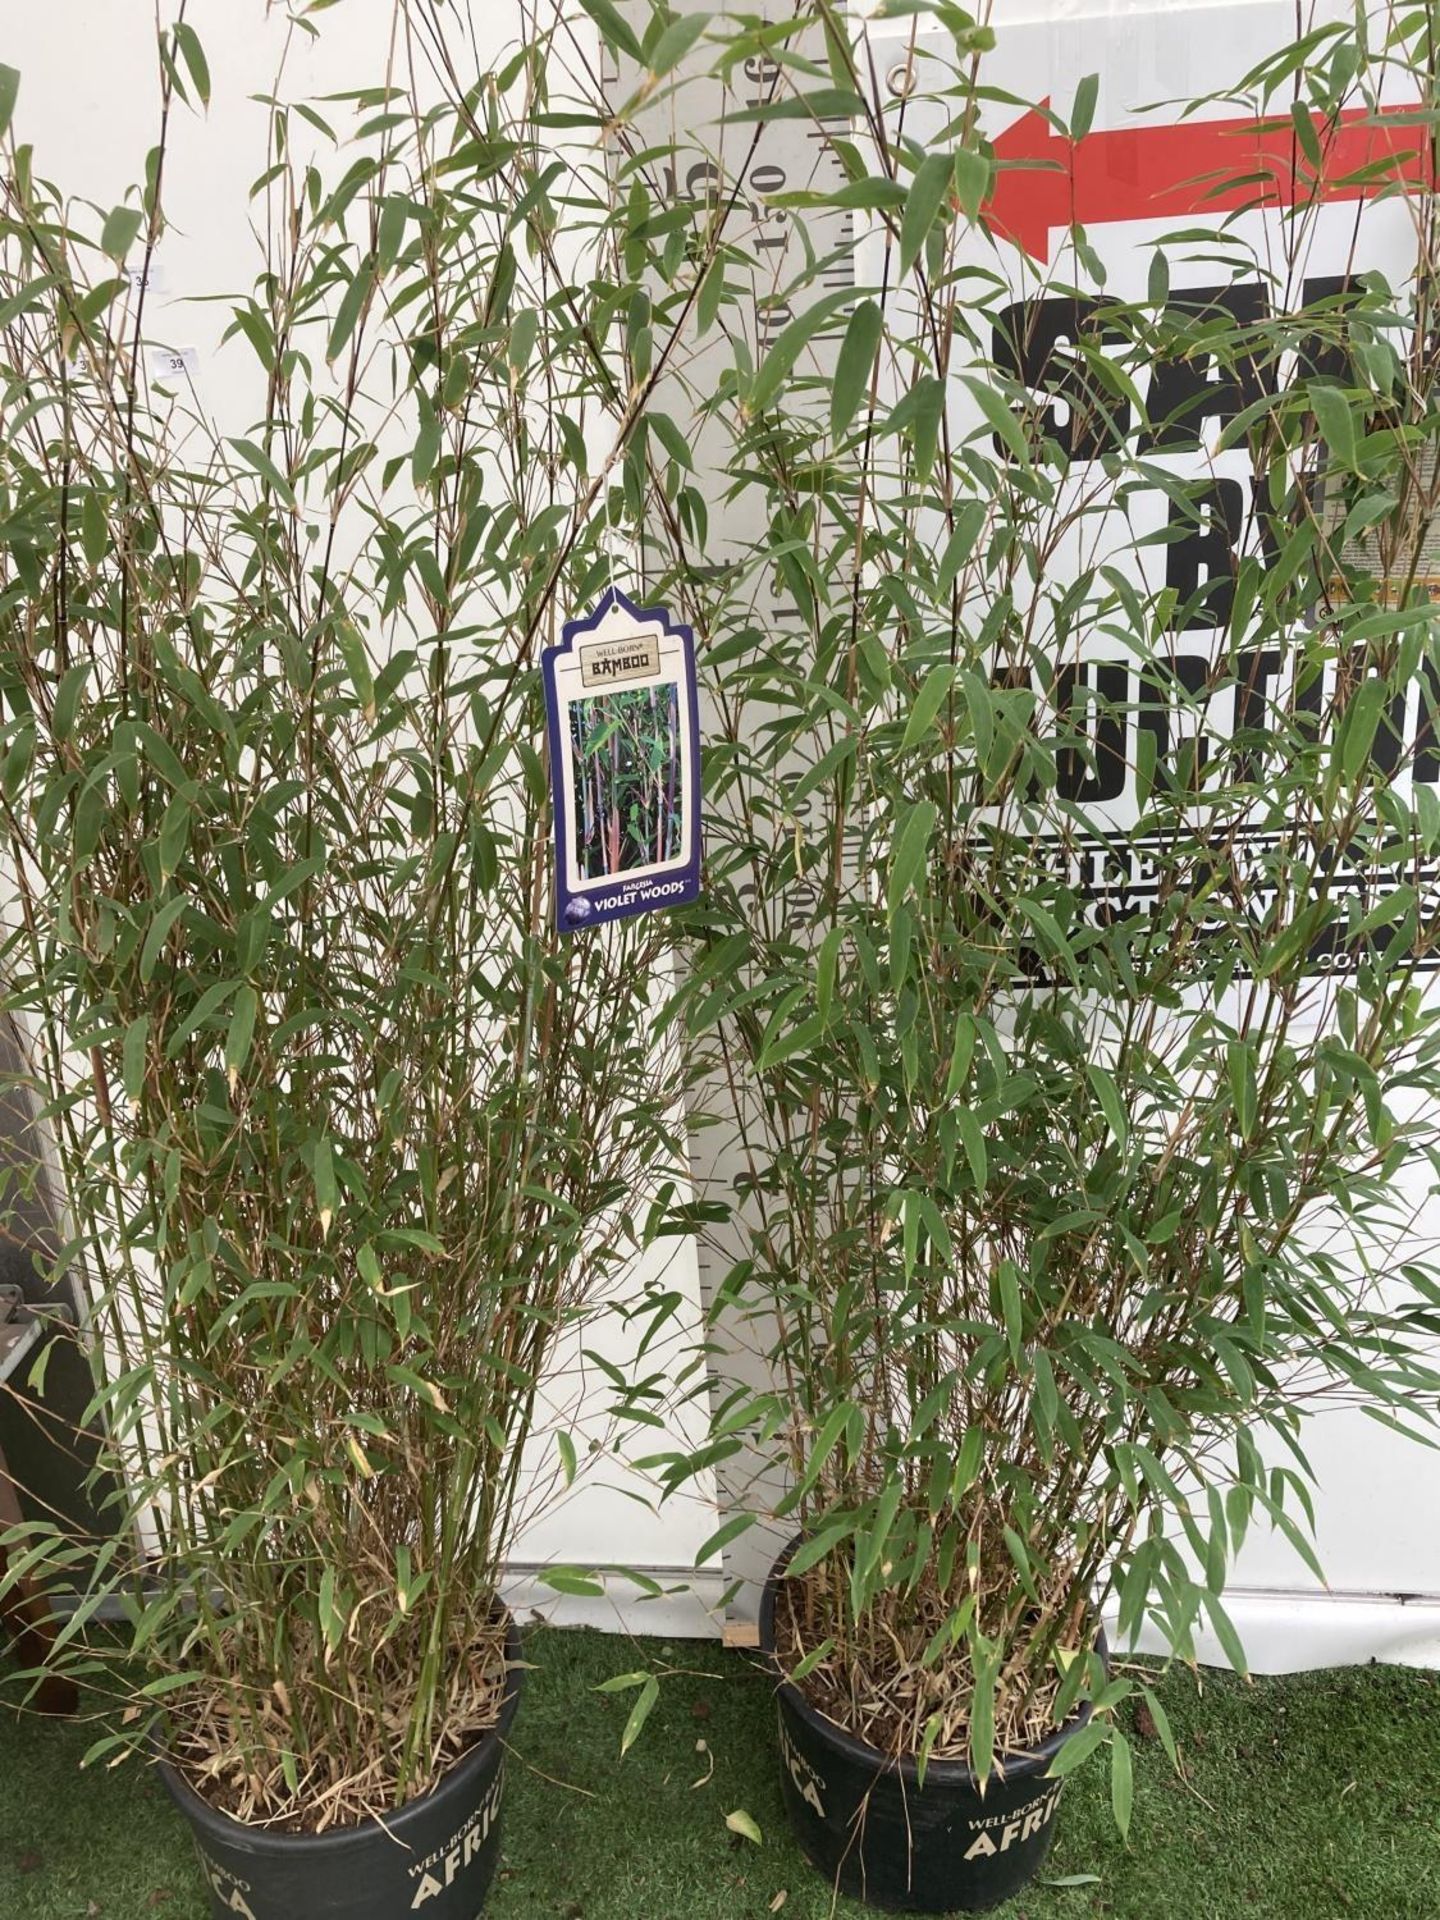 TWO LARGE BAMBOO FARGESIA 'VIOLET WOODS' APPROX 180CM IN HEIGHT IN 10 LTR POTS PLUS VAT TO BE SOLD - Image 5 of 6